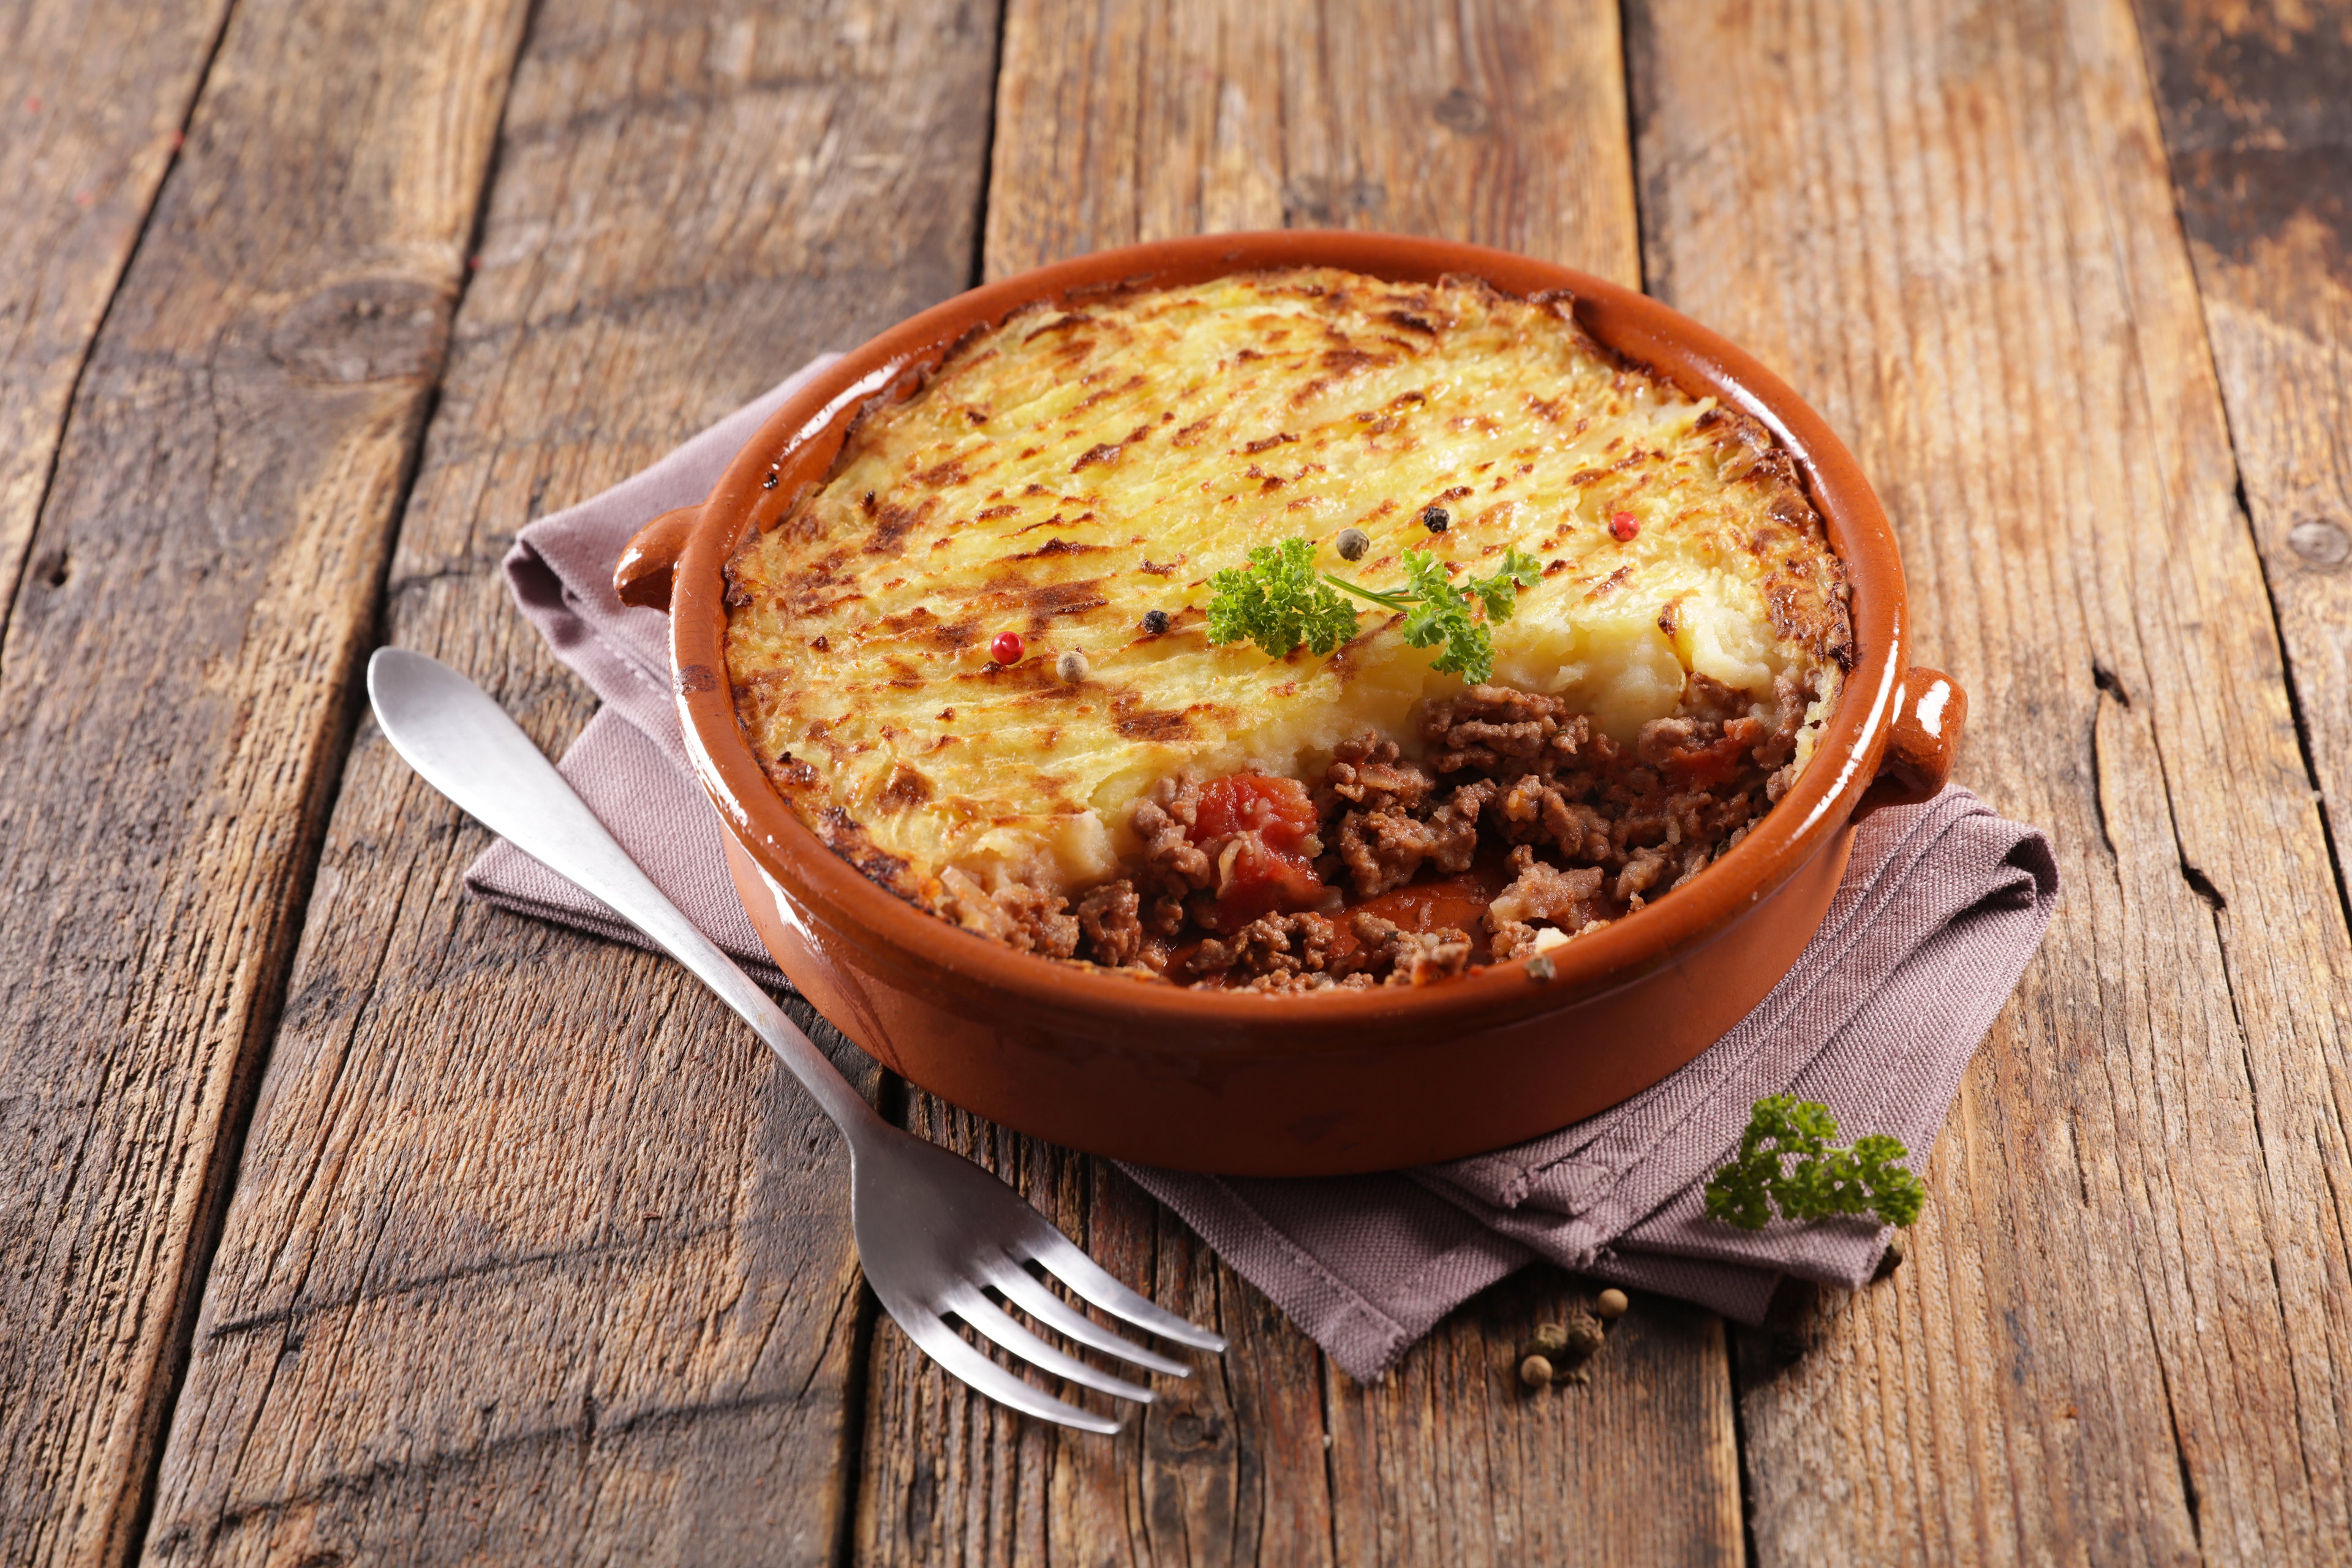 Shepherd's Pie is a hearty and comforting dish made with ground meat, vegetables, and mashed potatoes. 